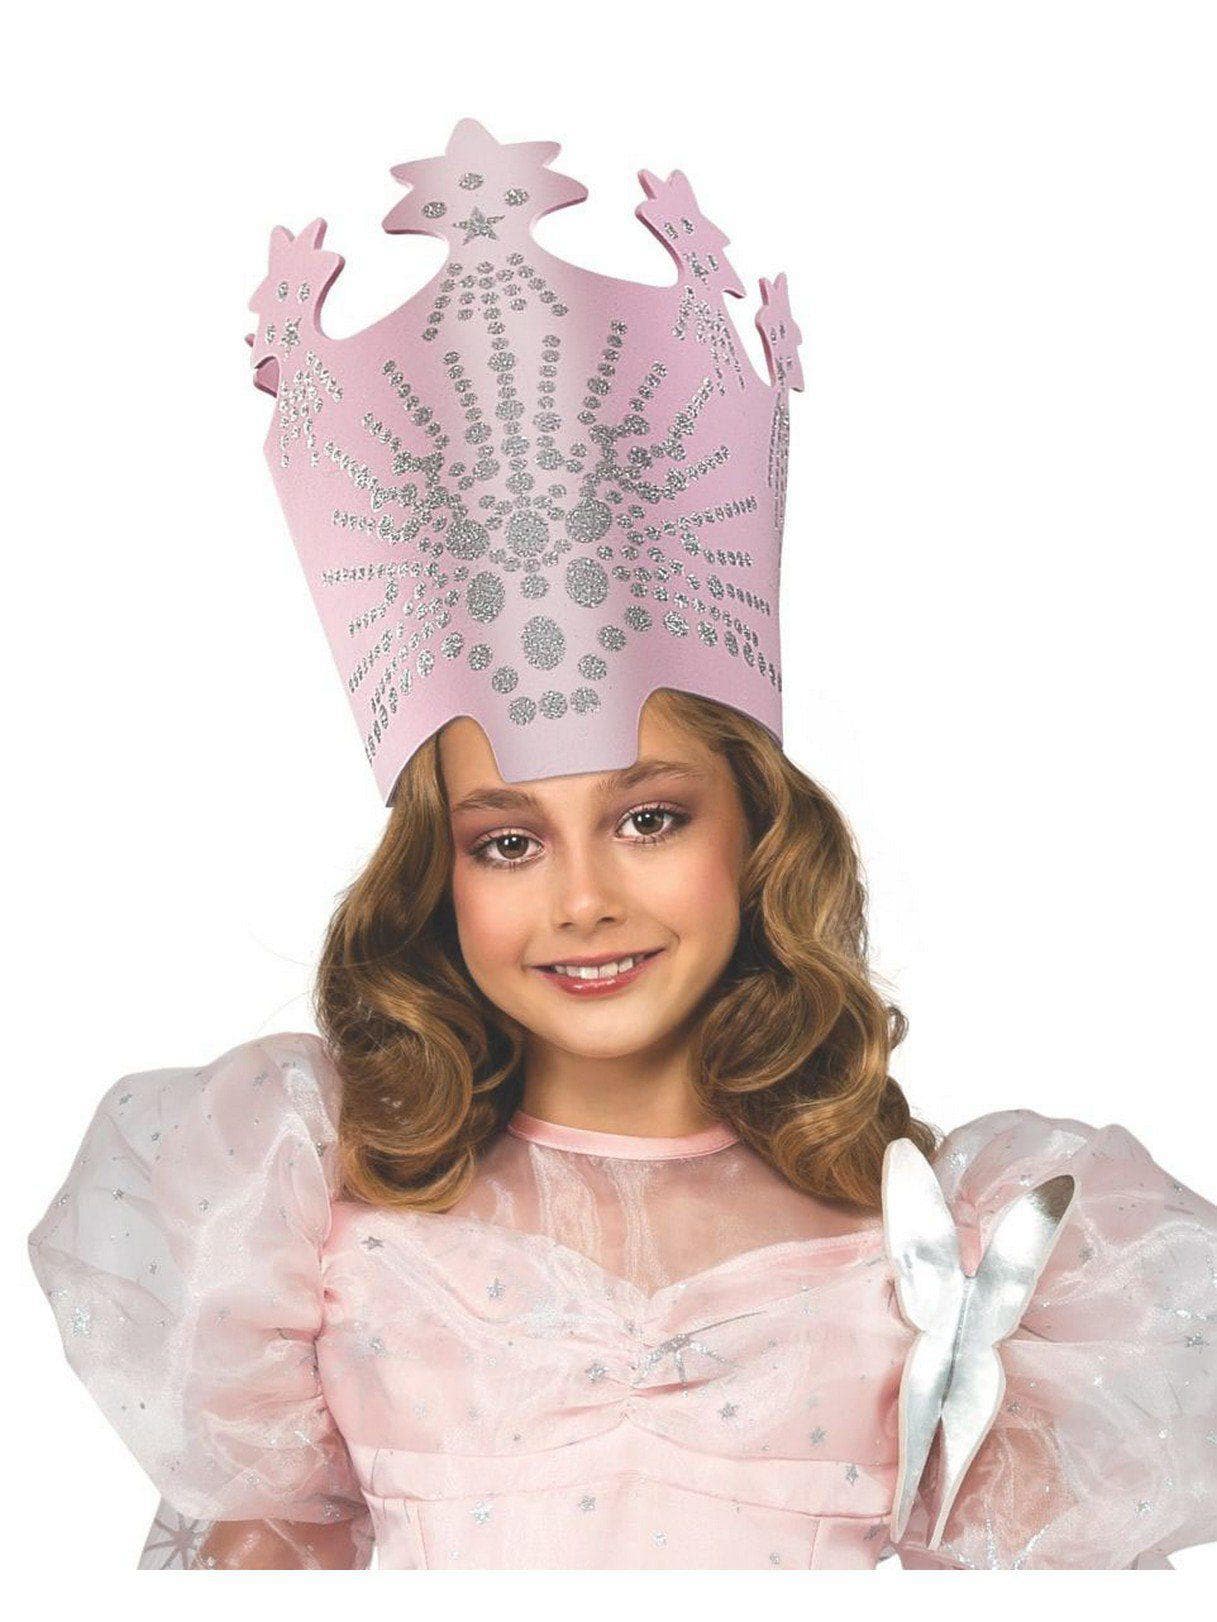 Girls' Glinda the Good Witch Crown - costumes.com